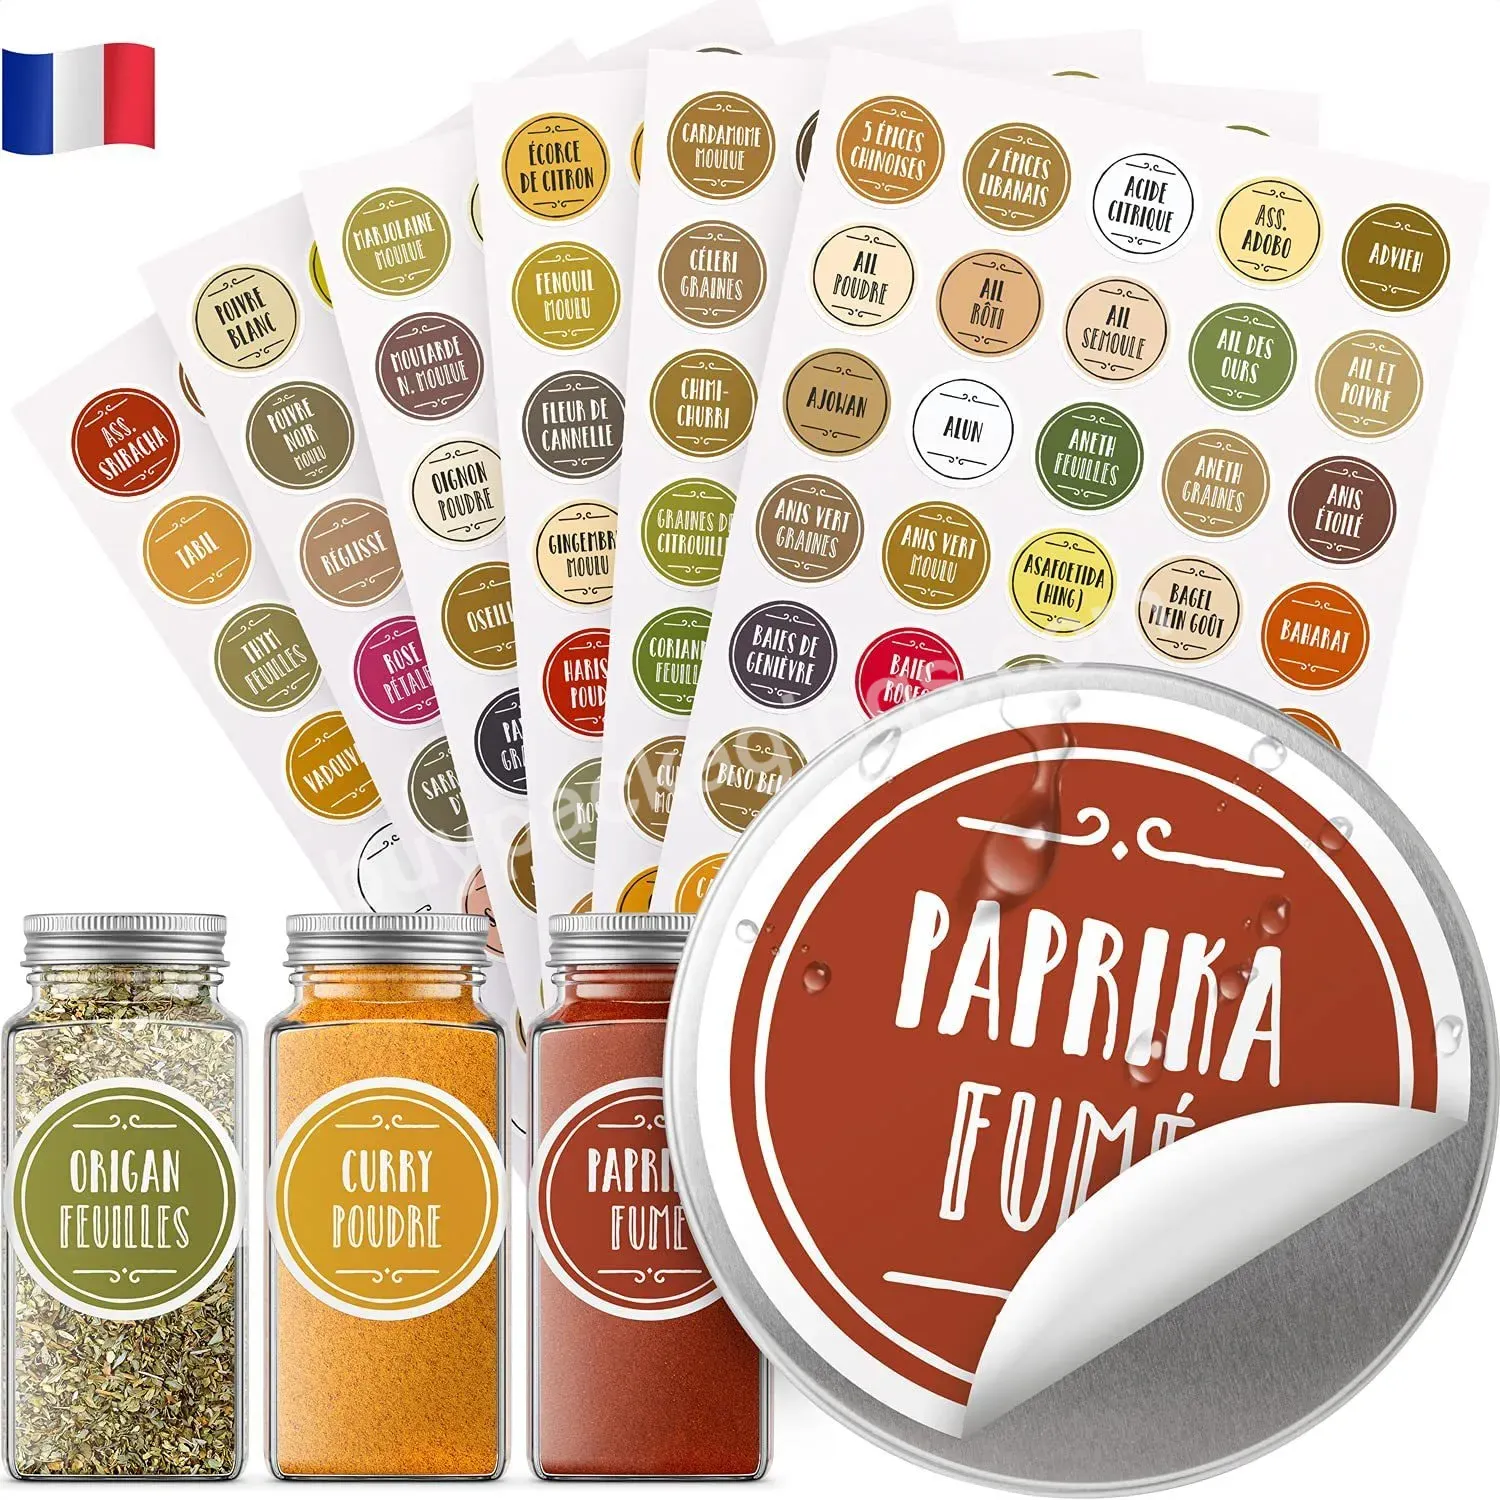 Hot Sale Spice Label And Pantry Label Set Herbs Names Water Resistant Spice Jar Sticker For Spice Organization - Buy 4oz Square Spice Bottles Glass Spice Jars With Silver Metal Lids Airtight Chalkboard Clear Label Pour Sift Shakers,Kitchen Containers